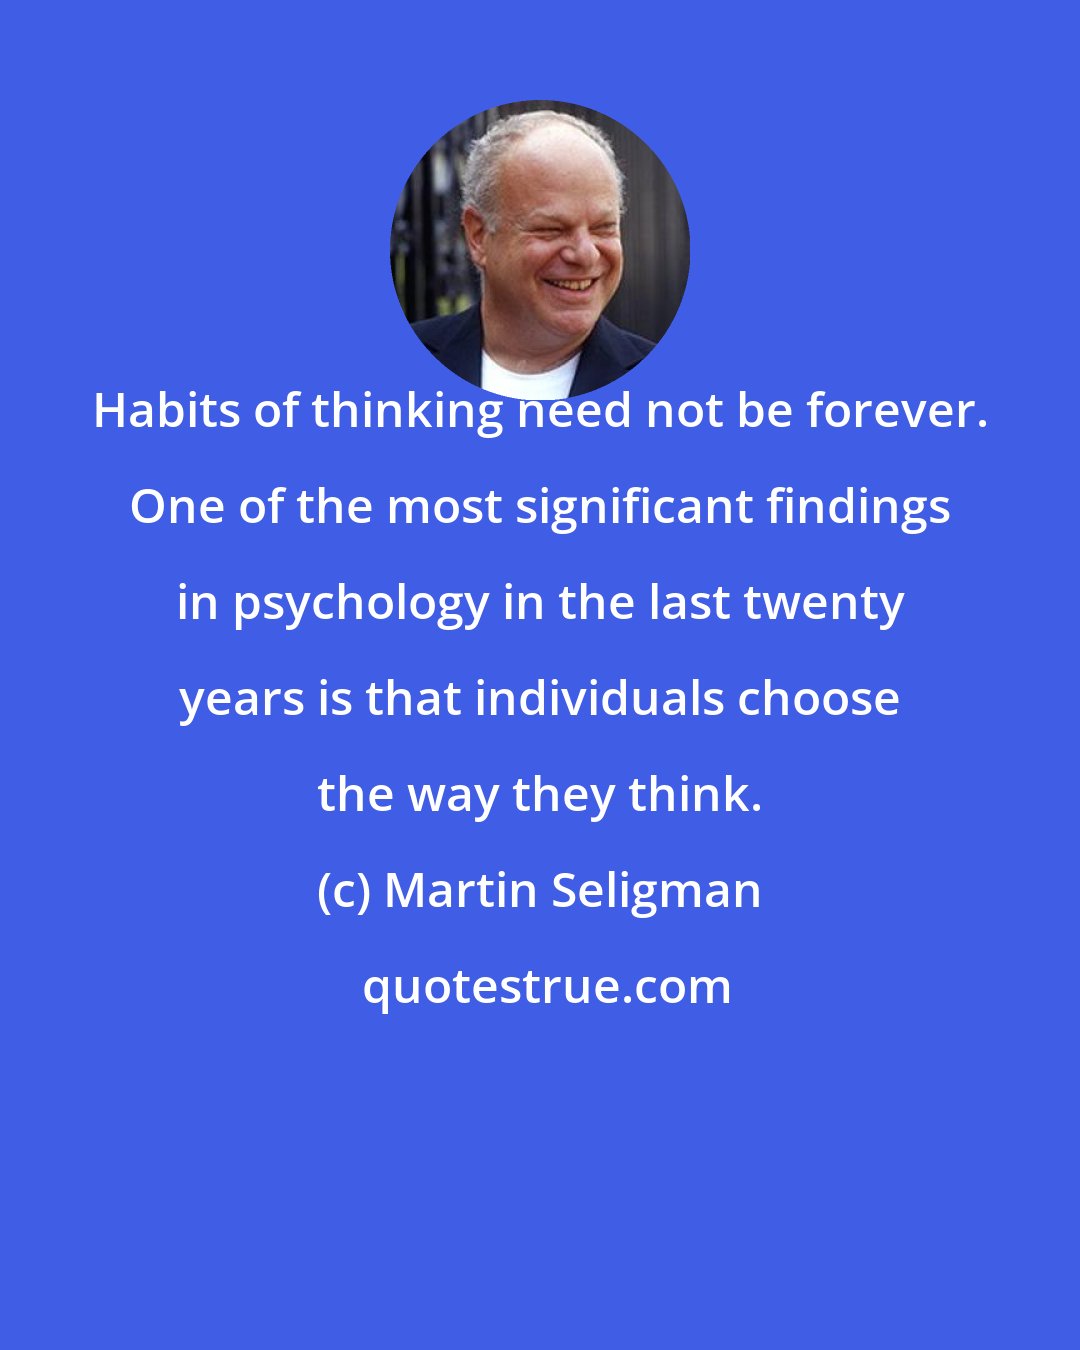 Martin Seligman: Habits of thinking need not be forever. One of the most significant findings in psychology in the last twenty years is that individuals choose the way they think.